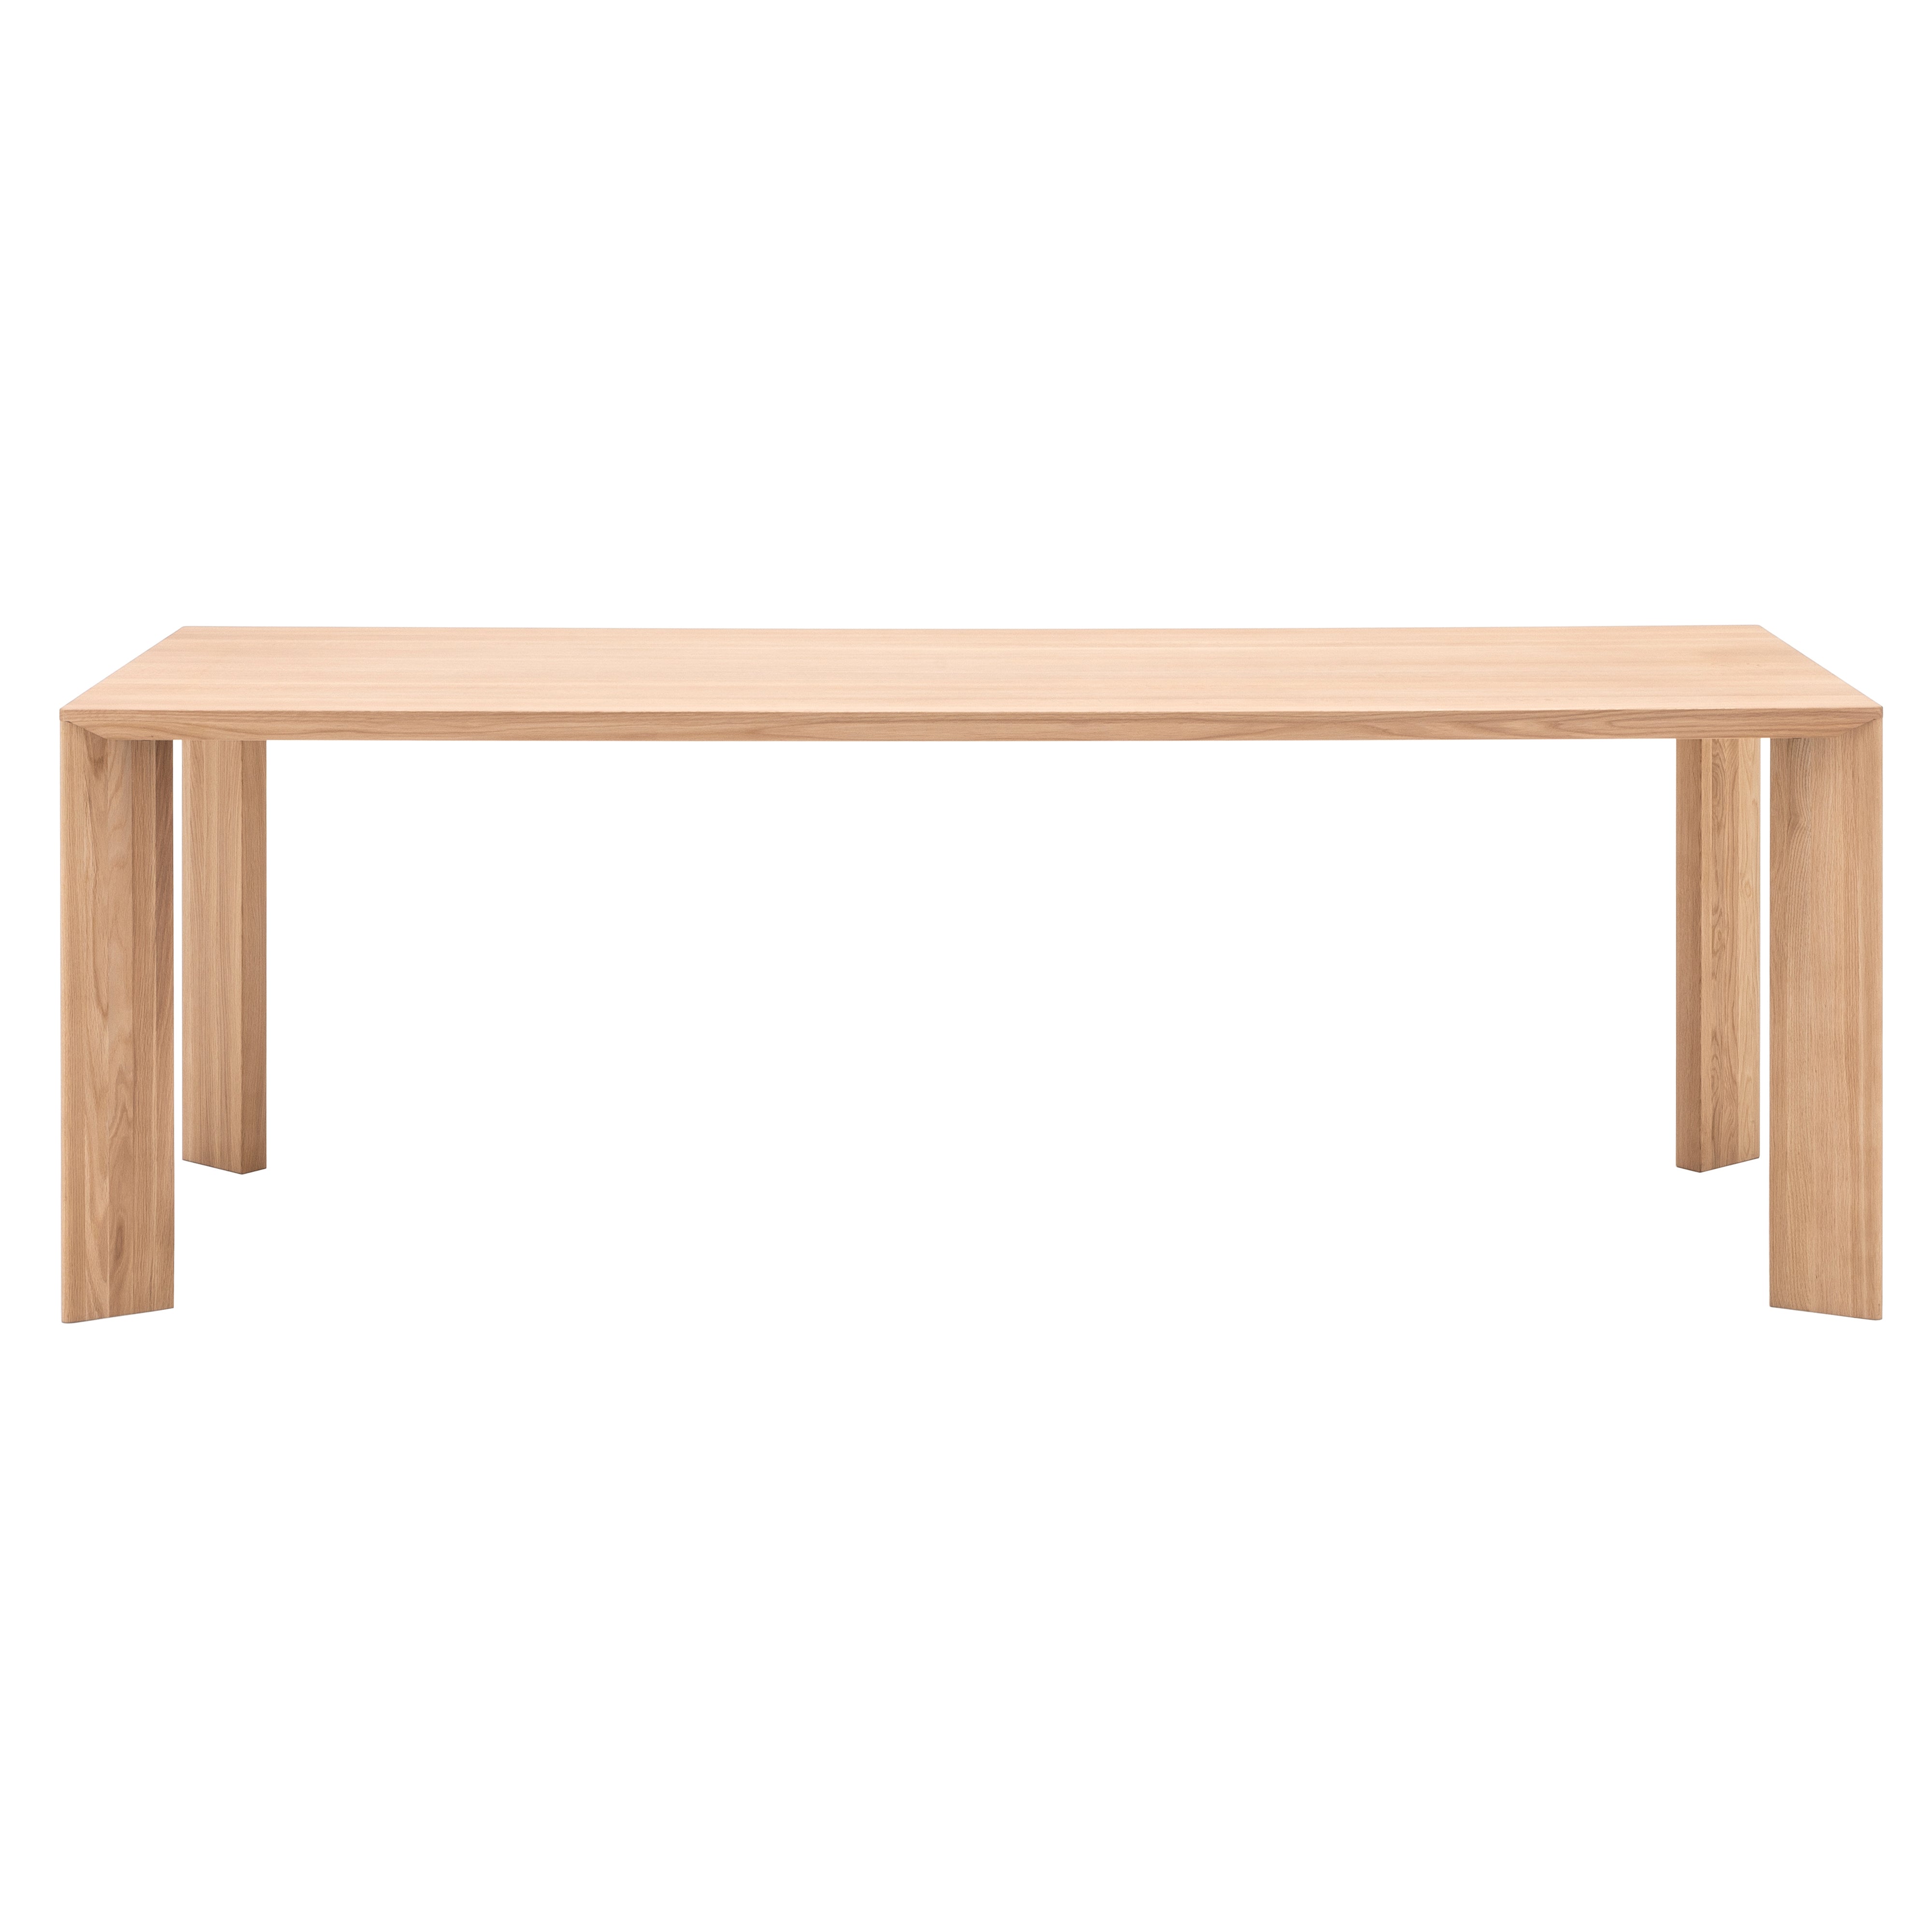 Azabu Residence Dining Table A-DT02: Extra Large - 86.6